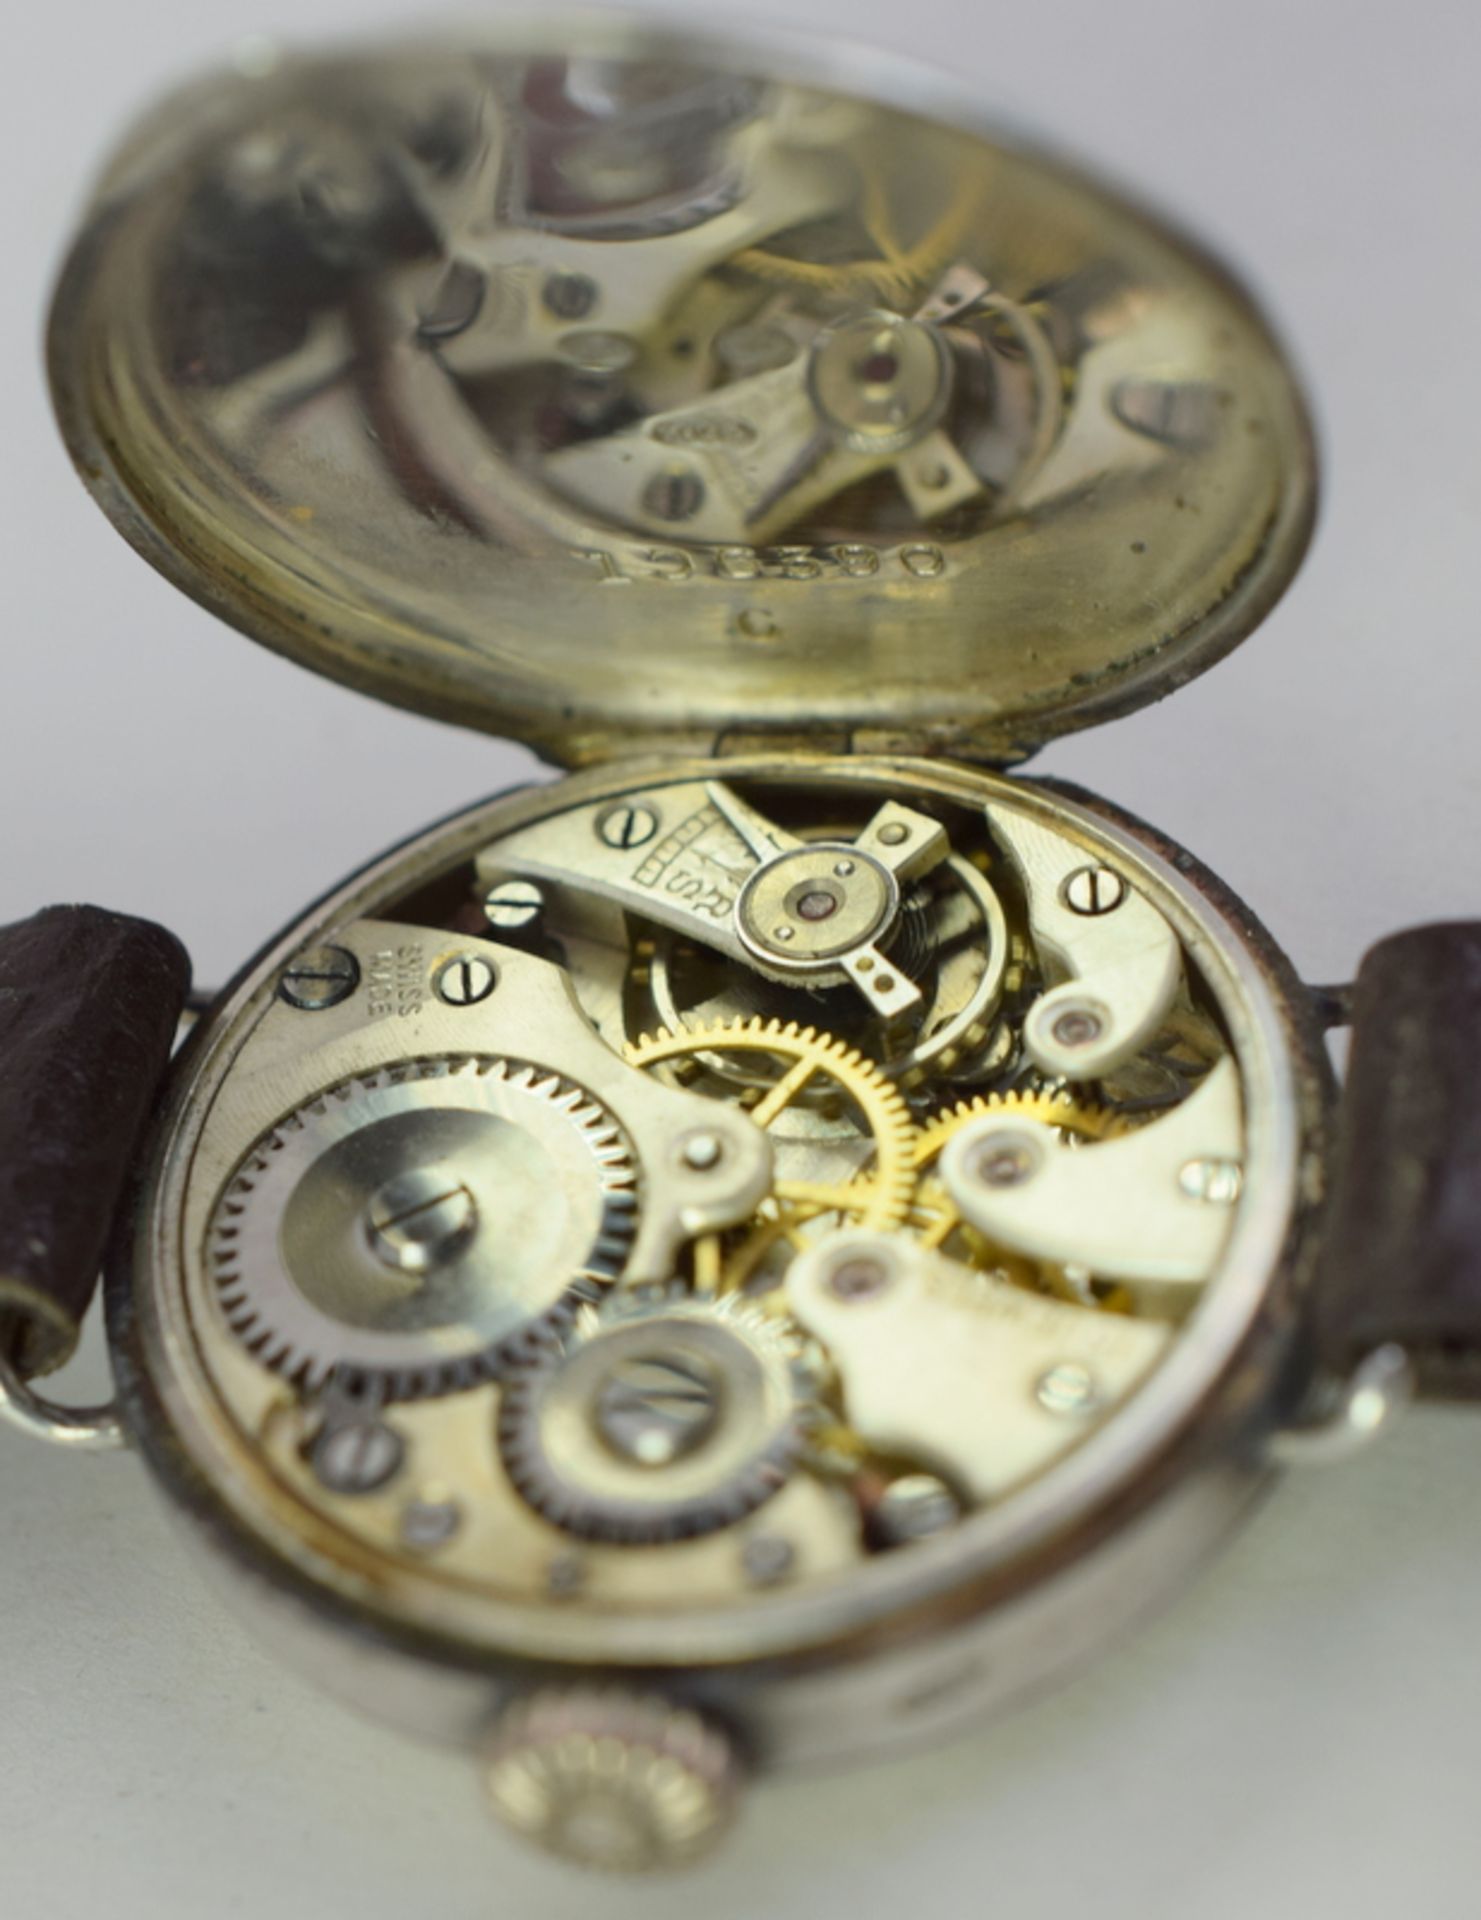 Lady's Silver Trench Watch c1920/30s - Image 6 of 7